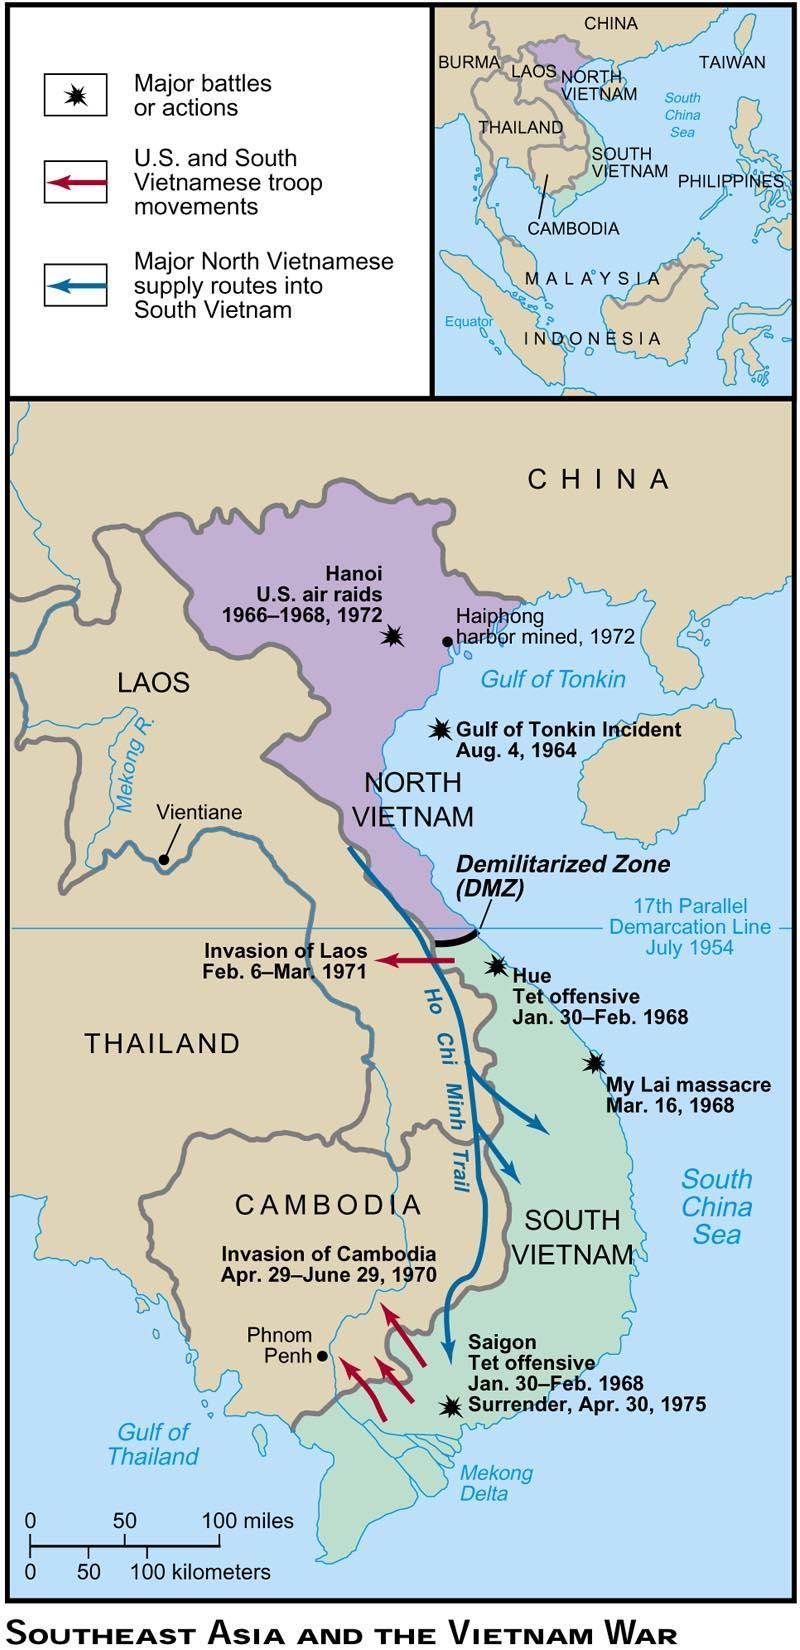 Through the Kennedy years, US troops trained S. Vietnamese troops to fight the Reds.